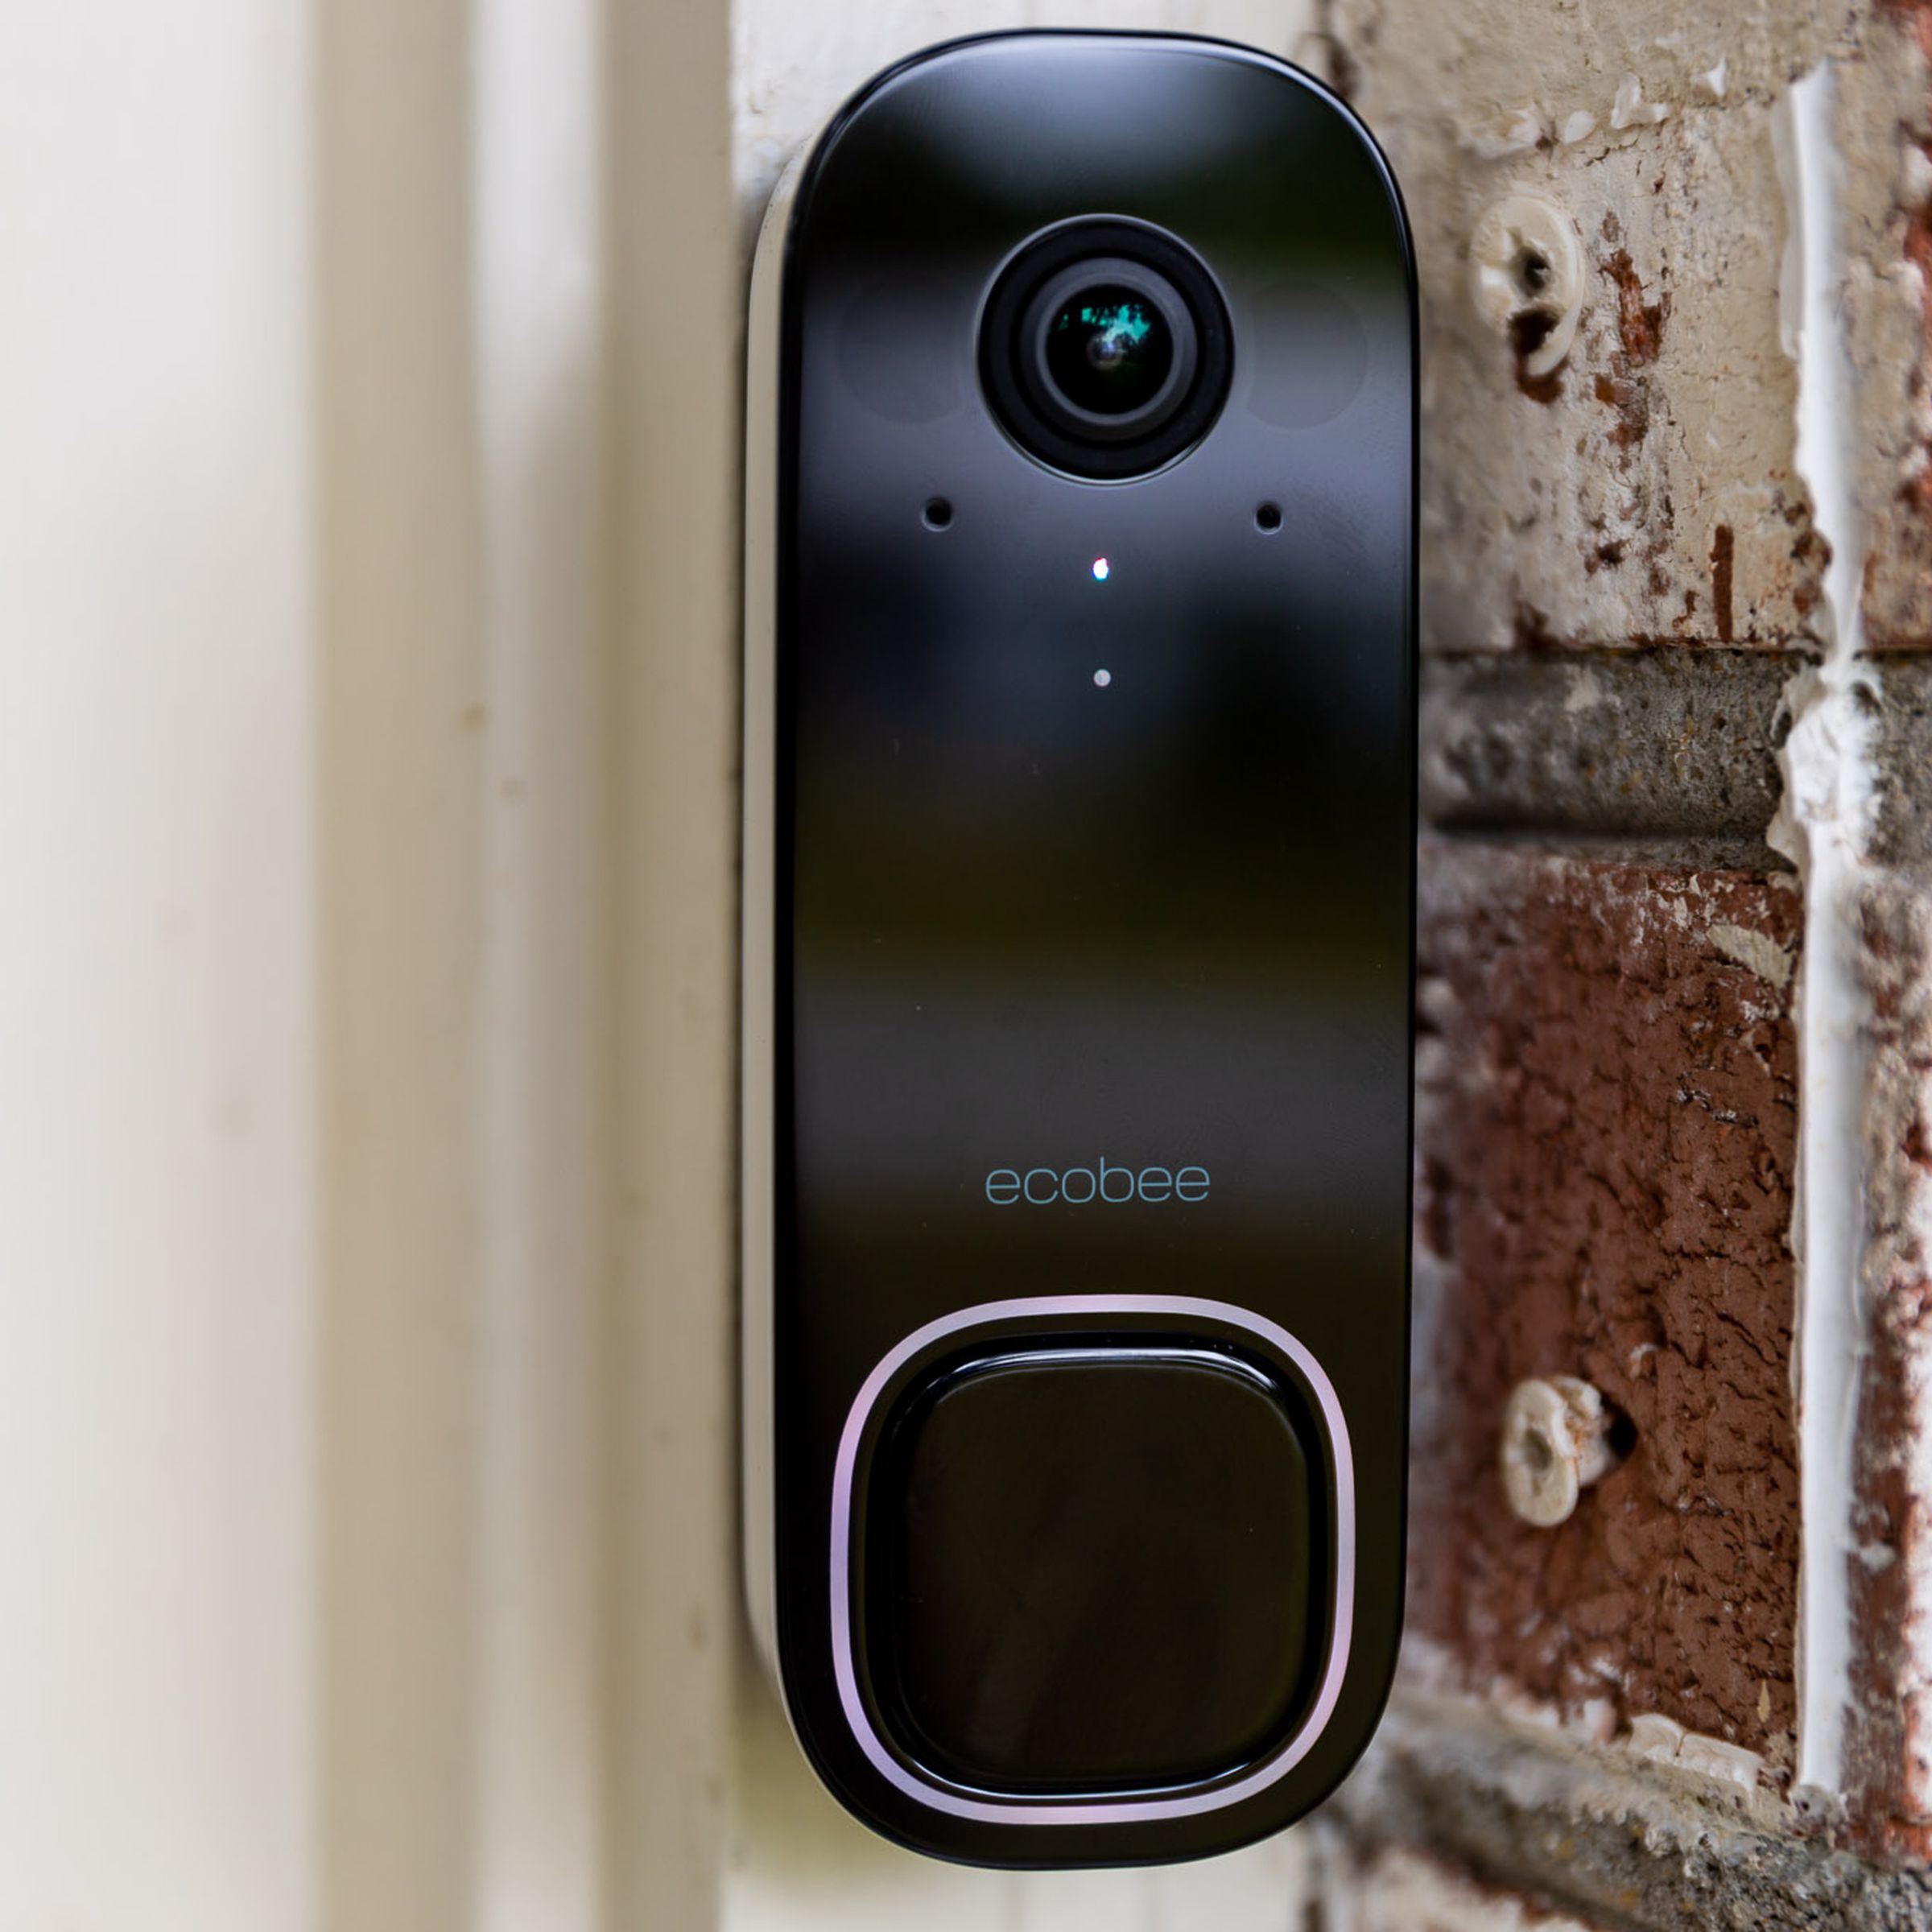 The newest product from Smart Thermostat company Ecobee is a smart video doorbell that uses radar and computer vision to tell you when there’s a person or a package at your door, but nothing else.